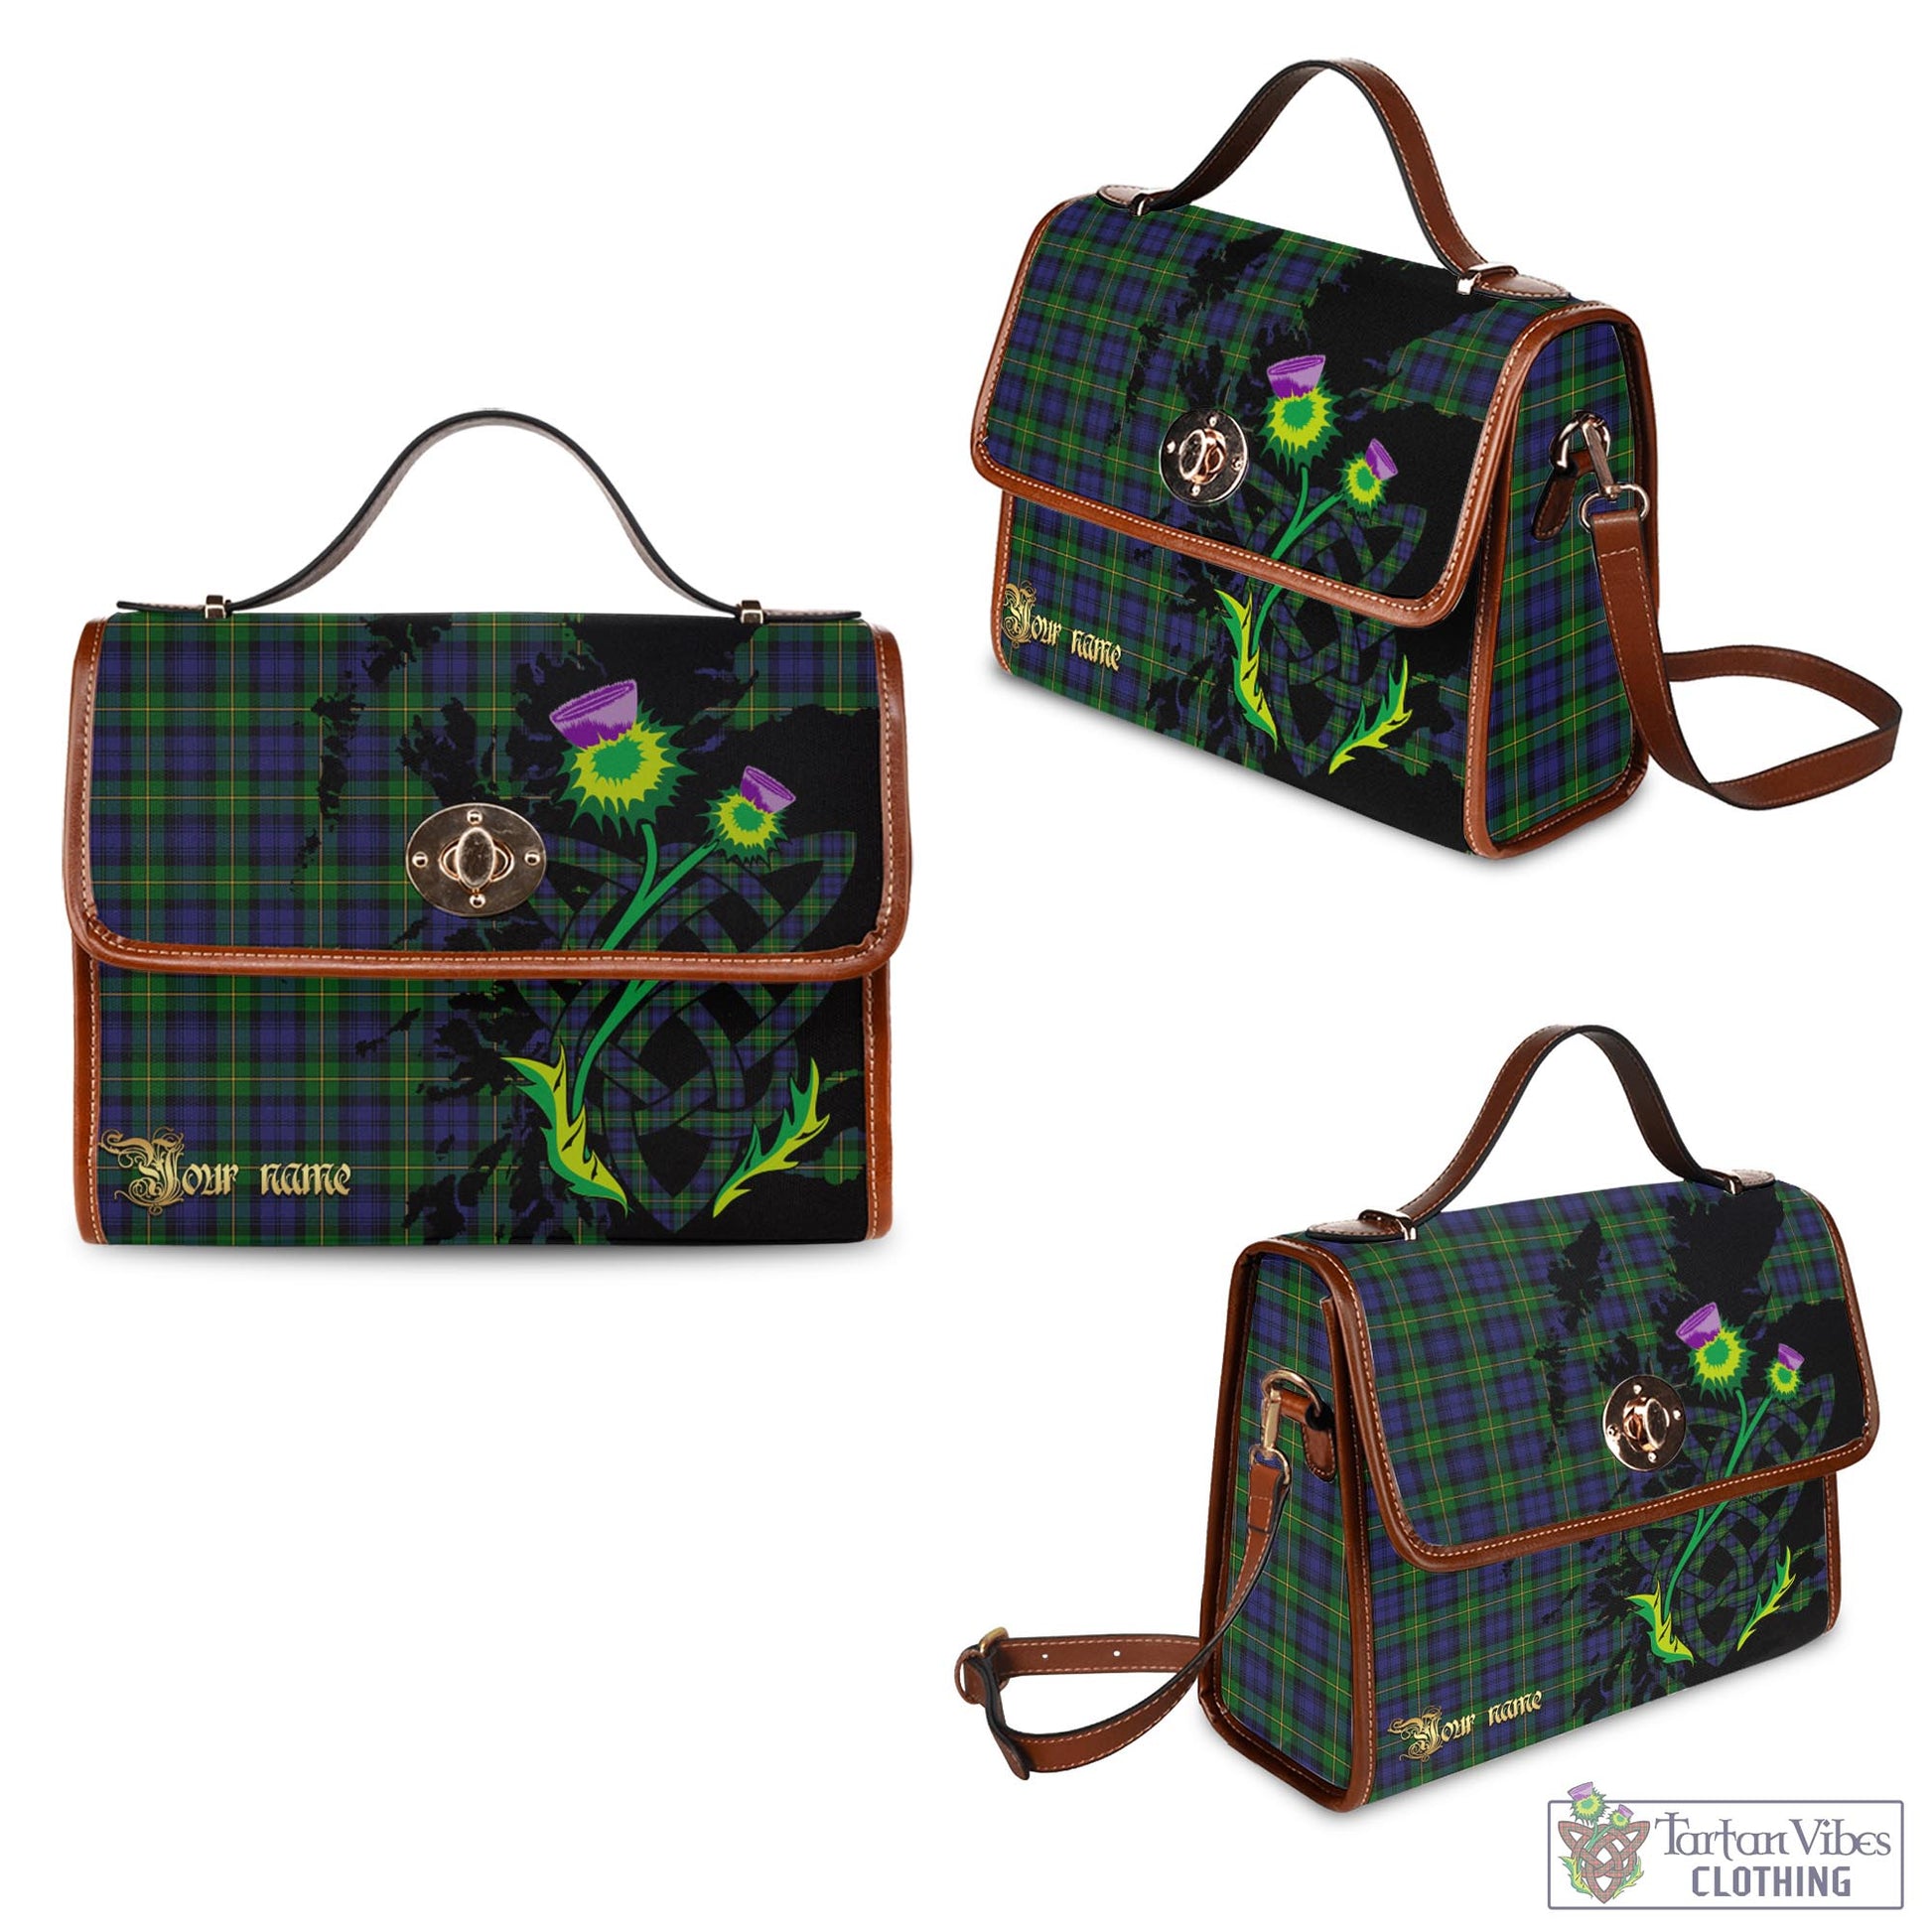 Tartan Vibes Clothing Gordon Tartan Waterproof Canvas Bag with Scotland Map and Thistle Celtic Accents